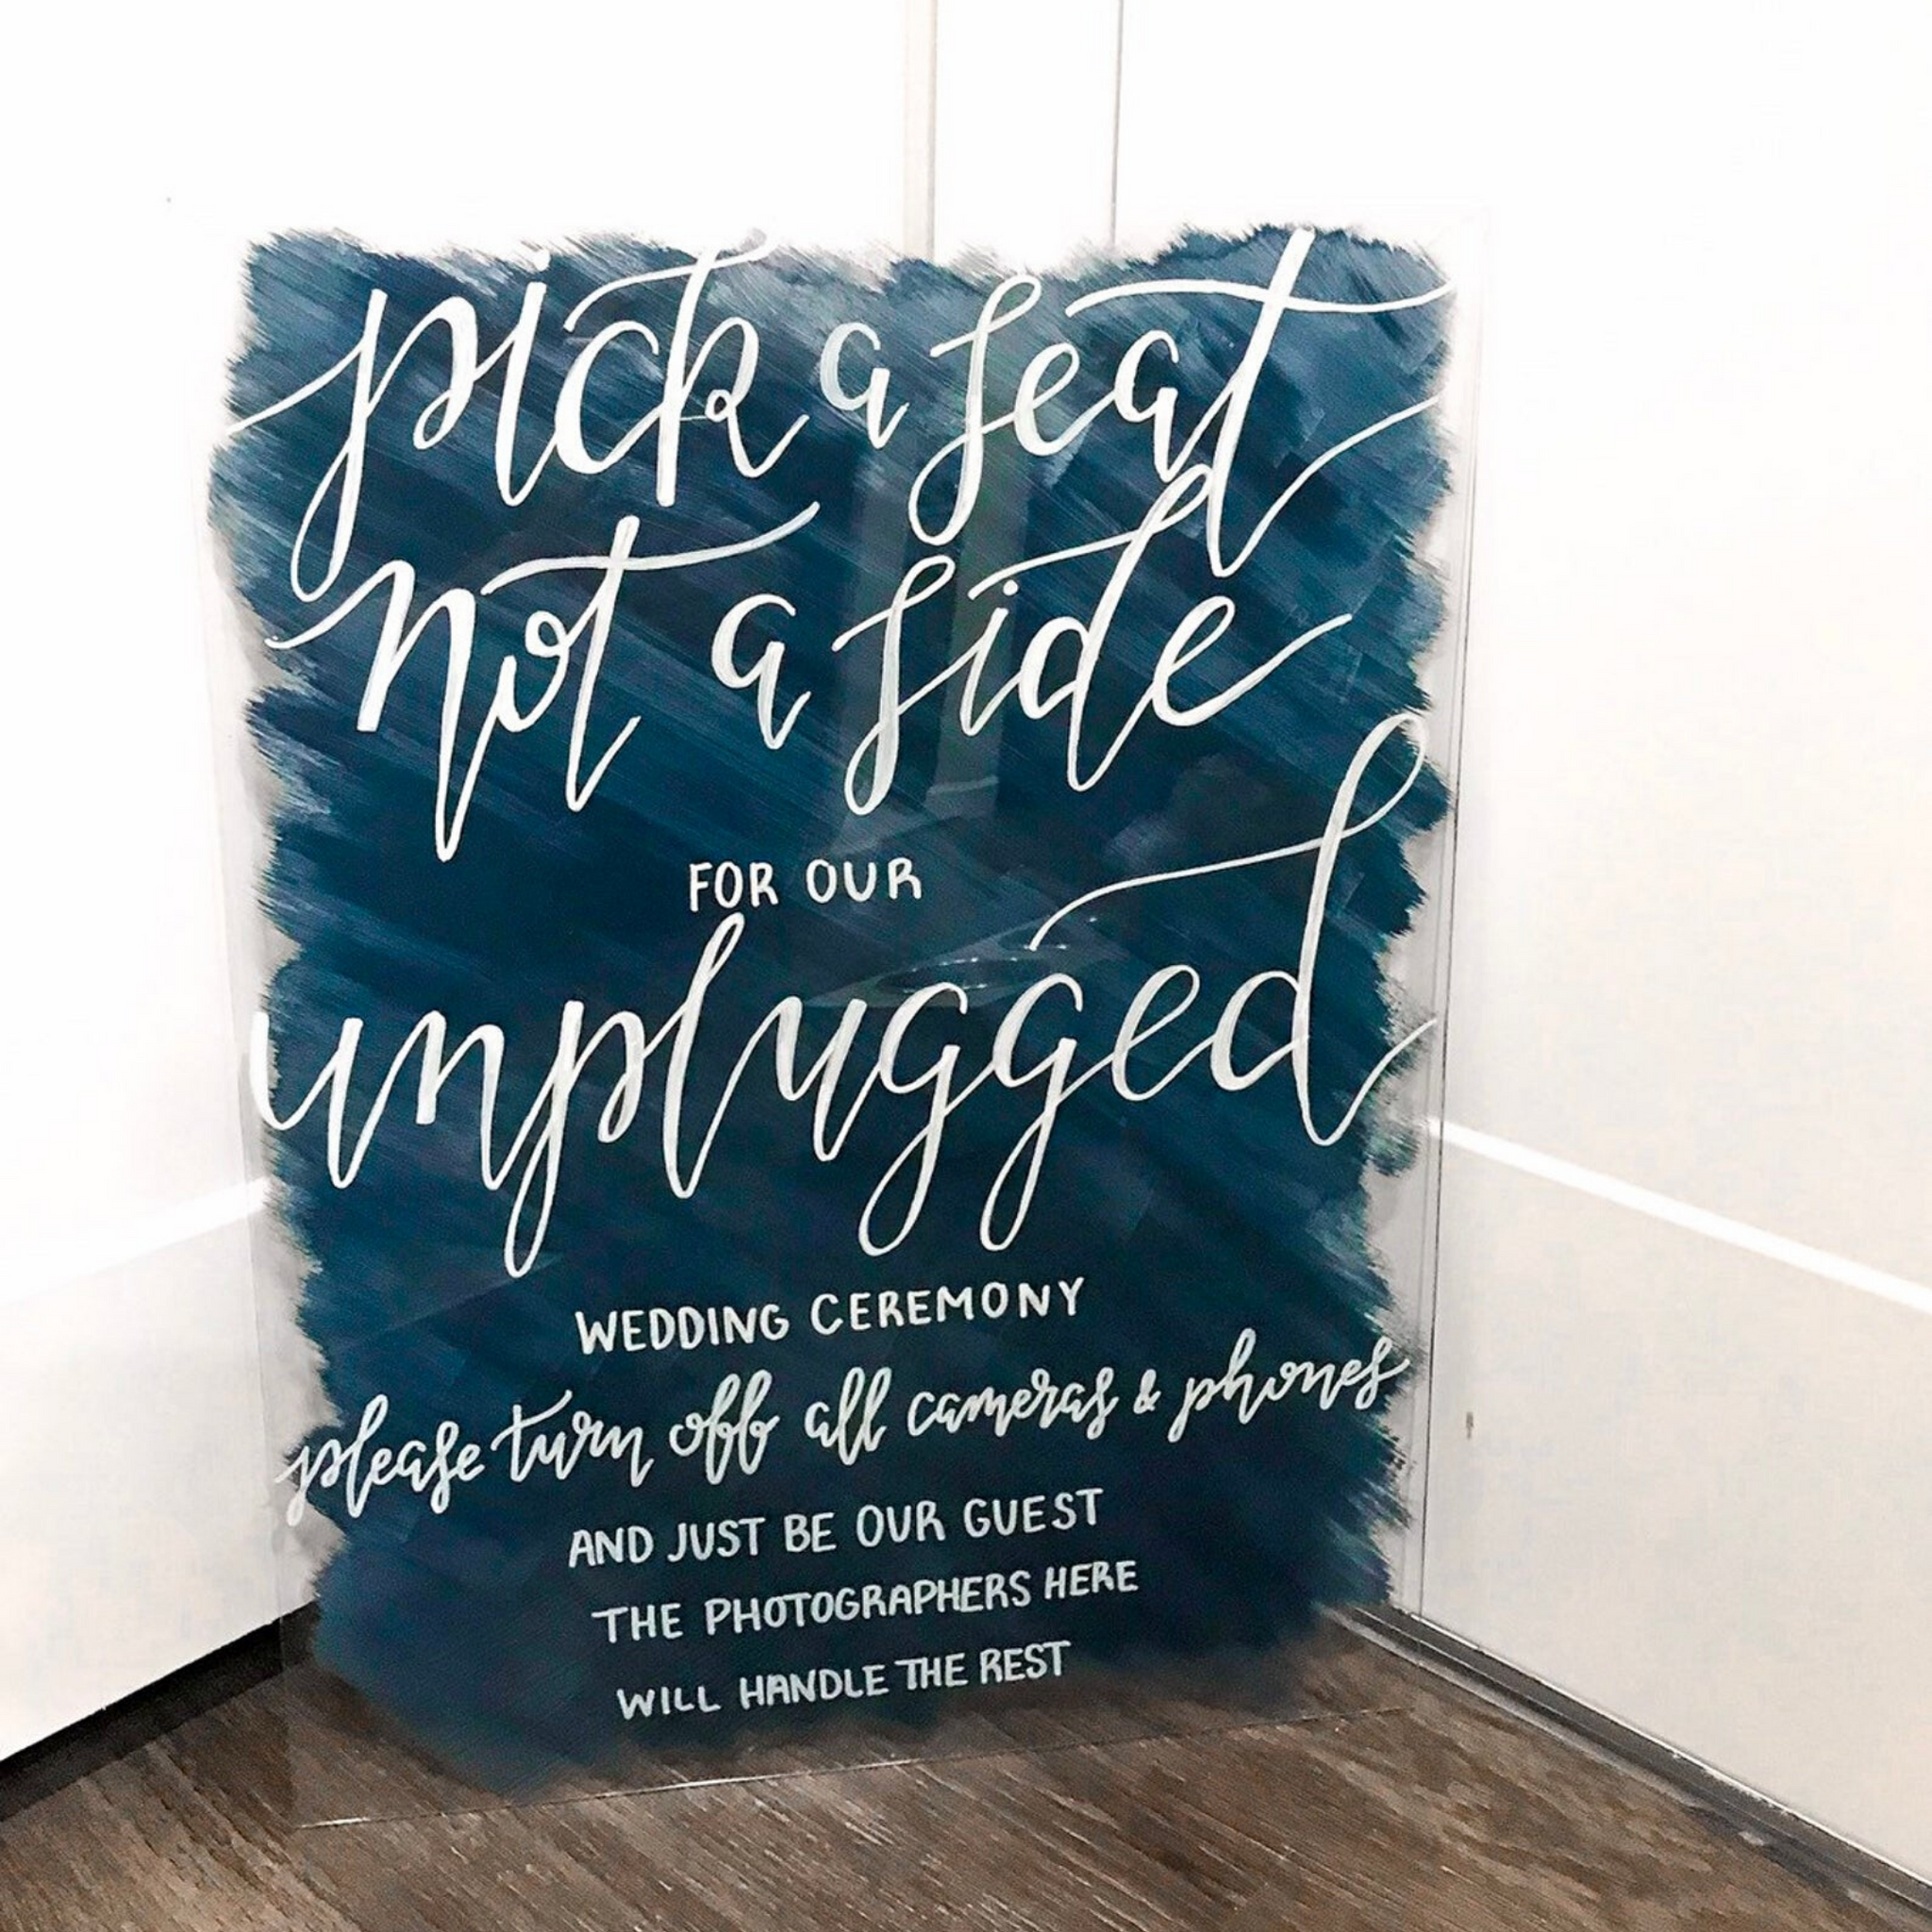 Unplugged Ceremony, Pick A Seat Not A Side, Wedding Sign, Wedding Ceremony Sign 16x20 inch